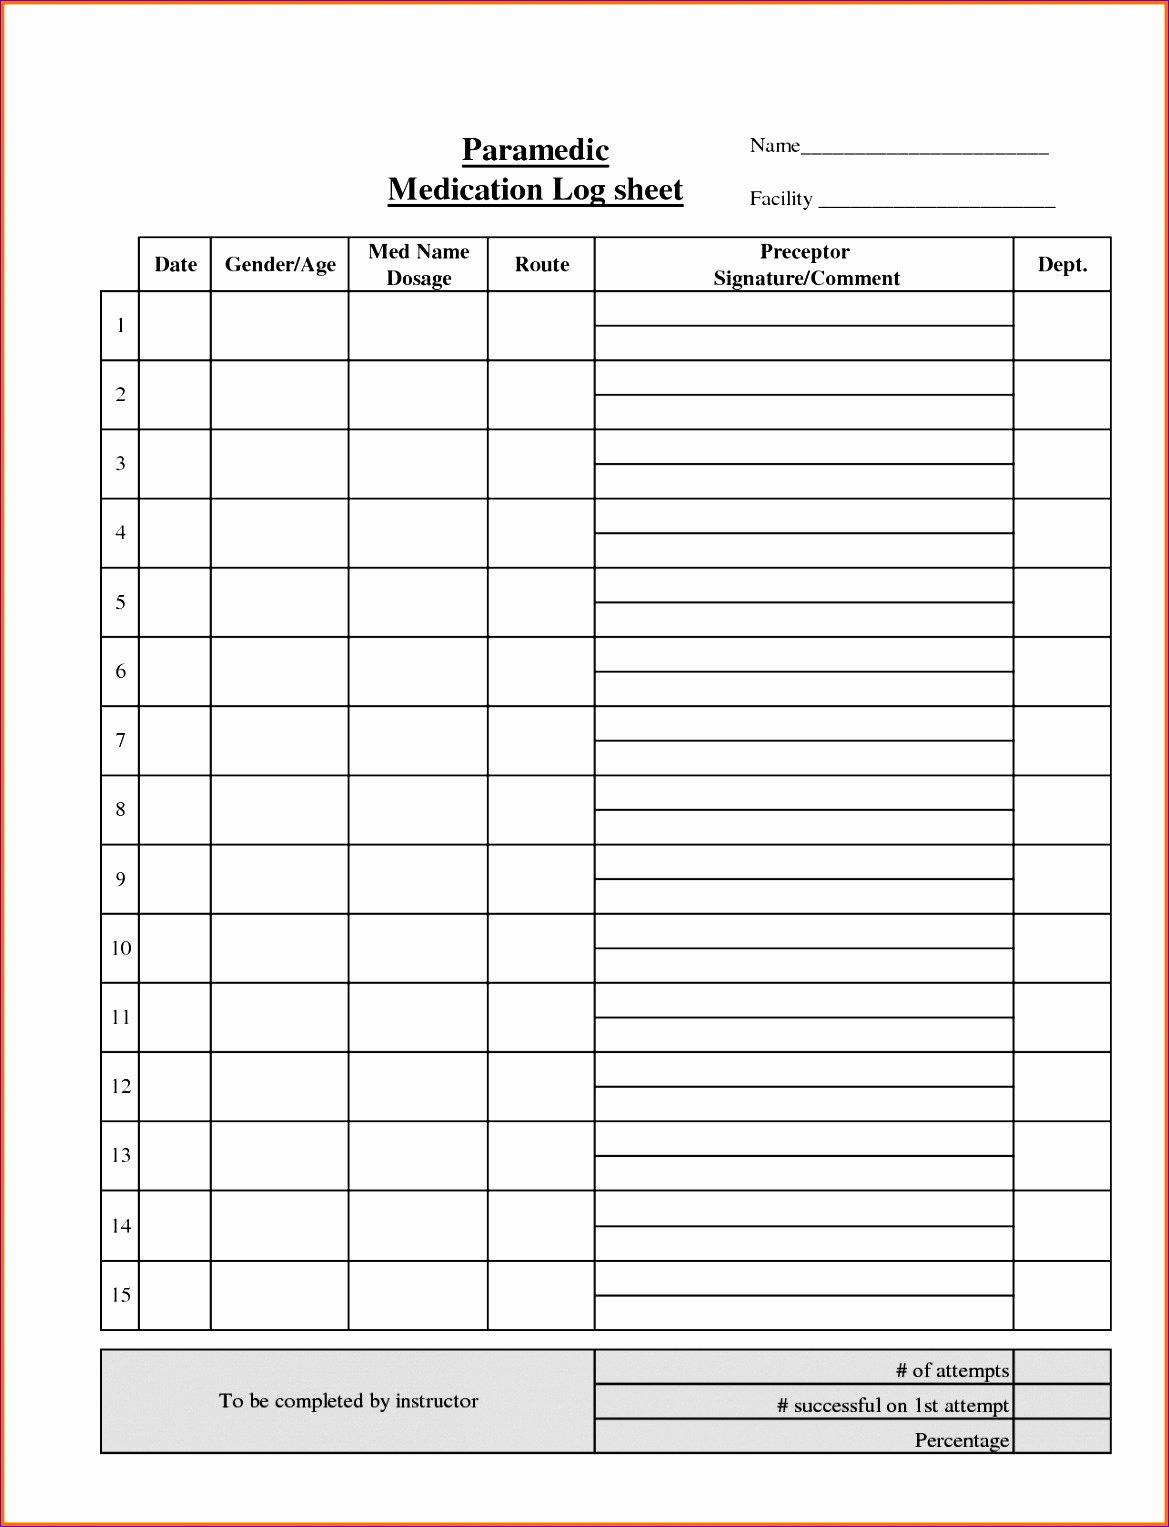 Punch List Template Excel Fresh 10 Punch List Template Excel Exceltemplates Exceltemplates